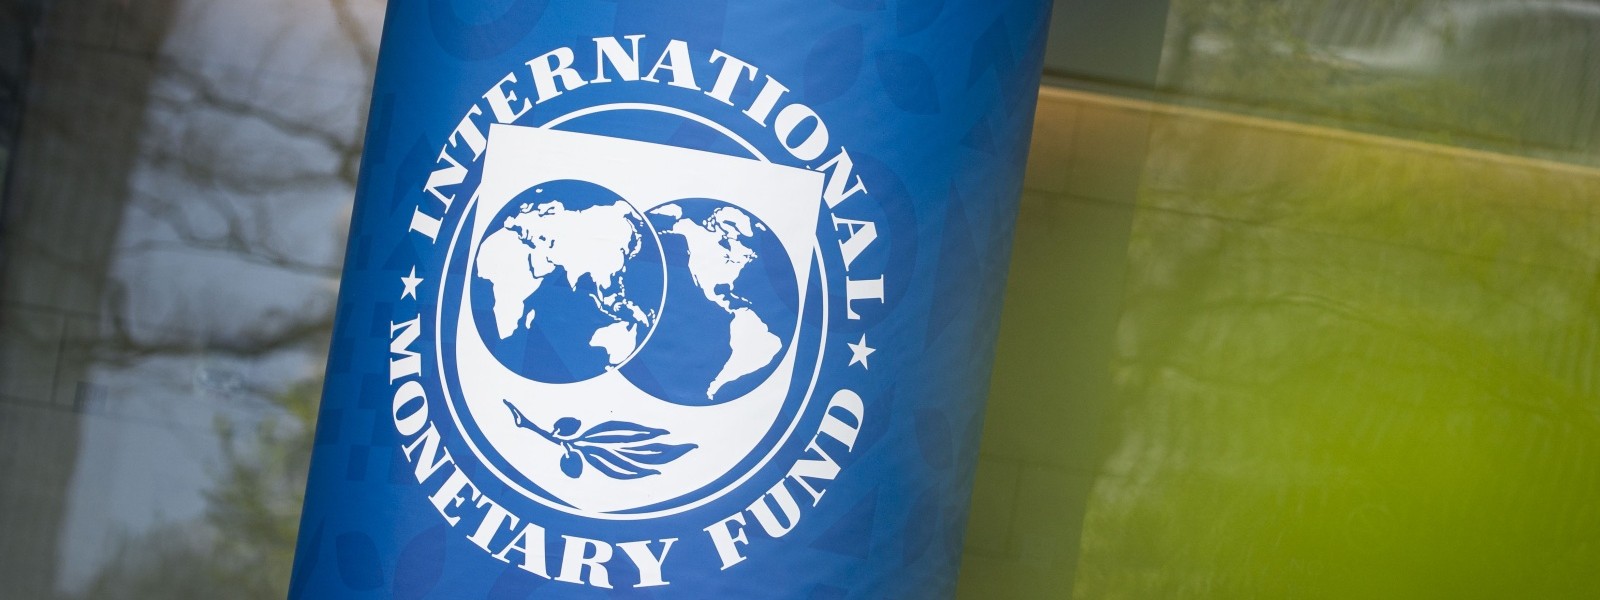 Despite signs of stabilization, full economic recovery not yet assured – IMF Mission